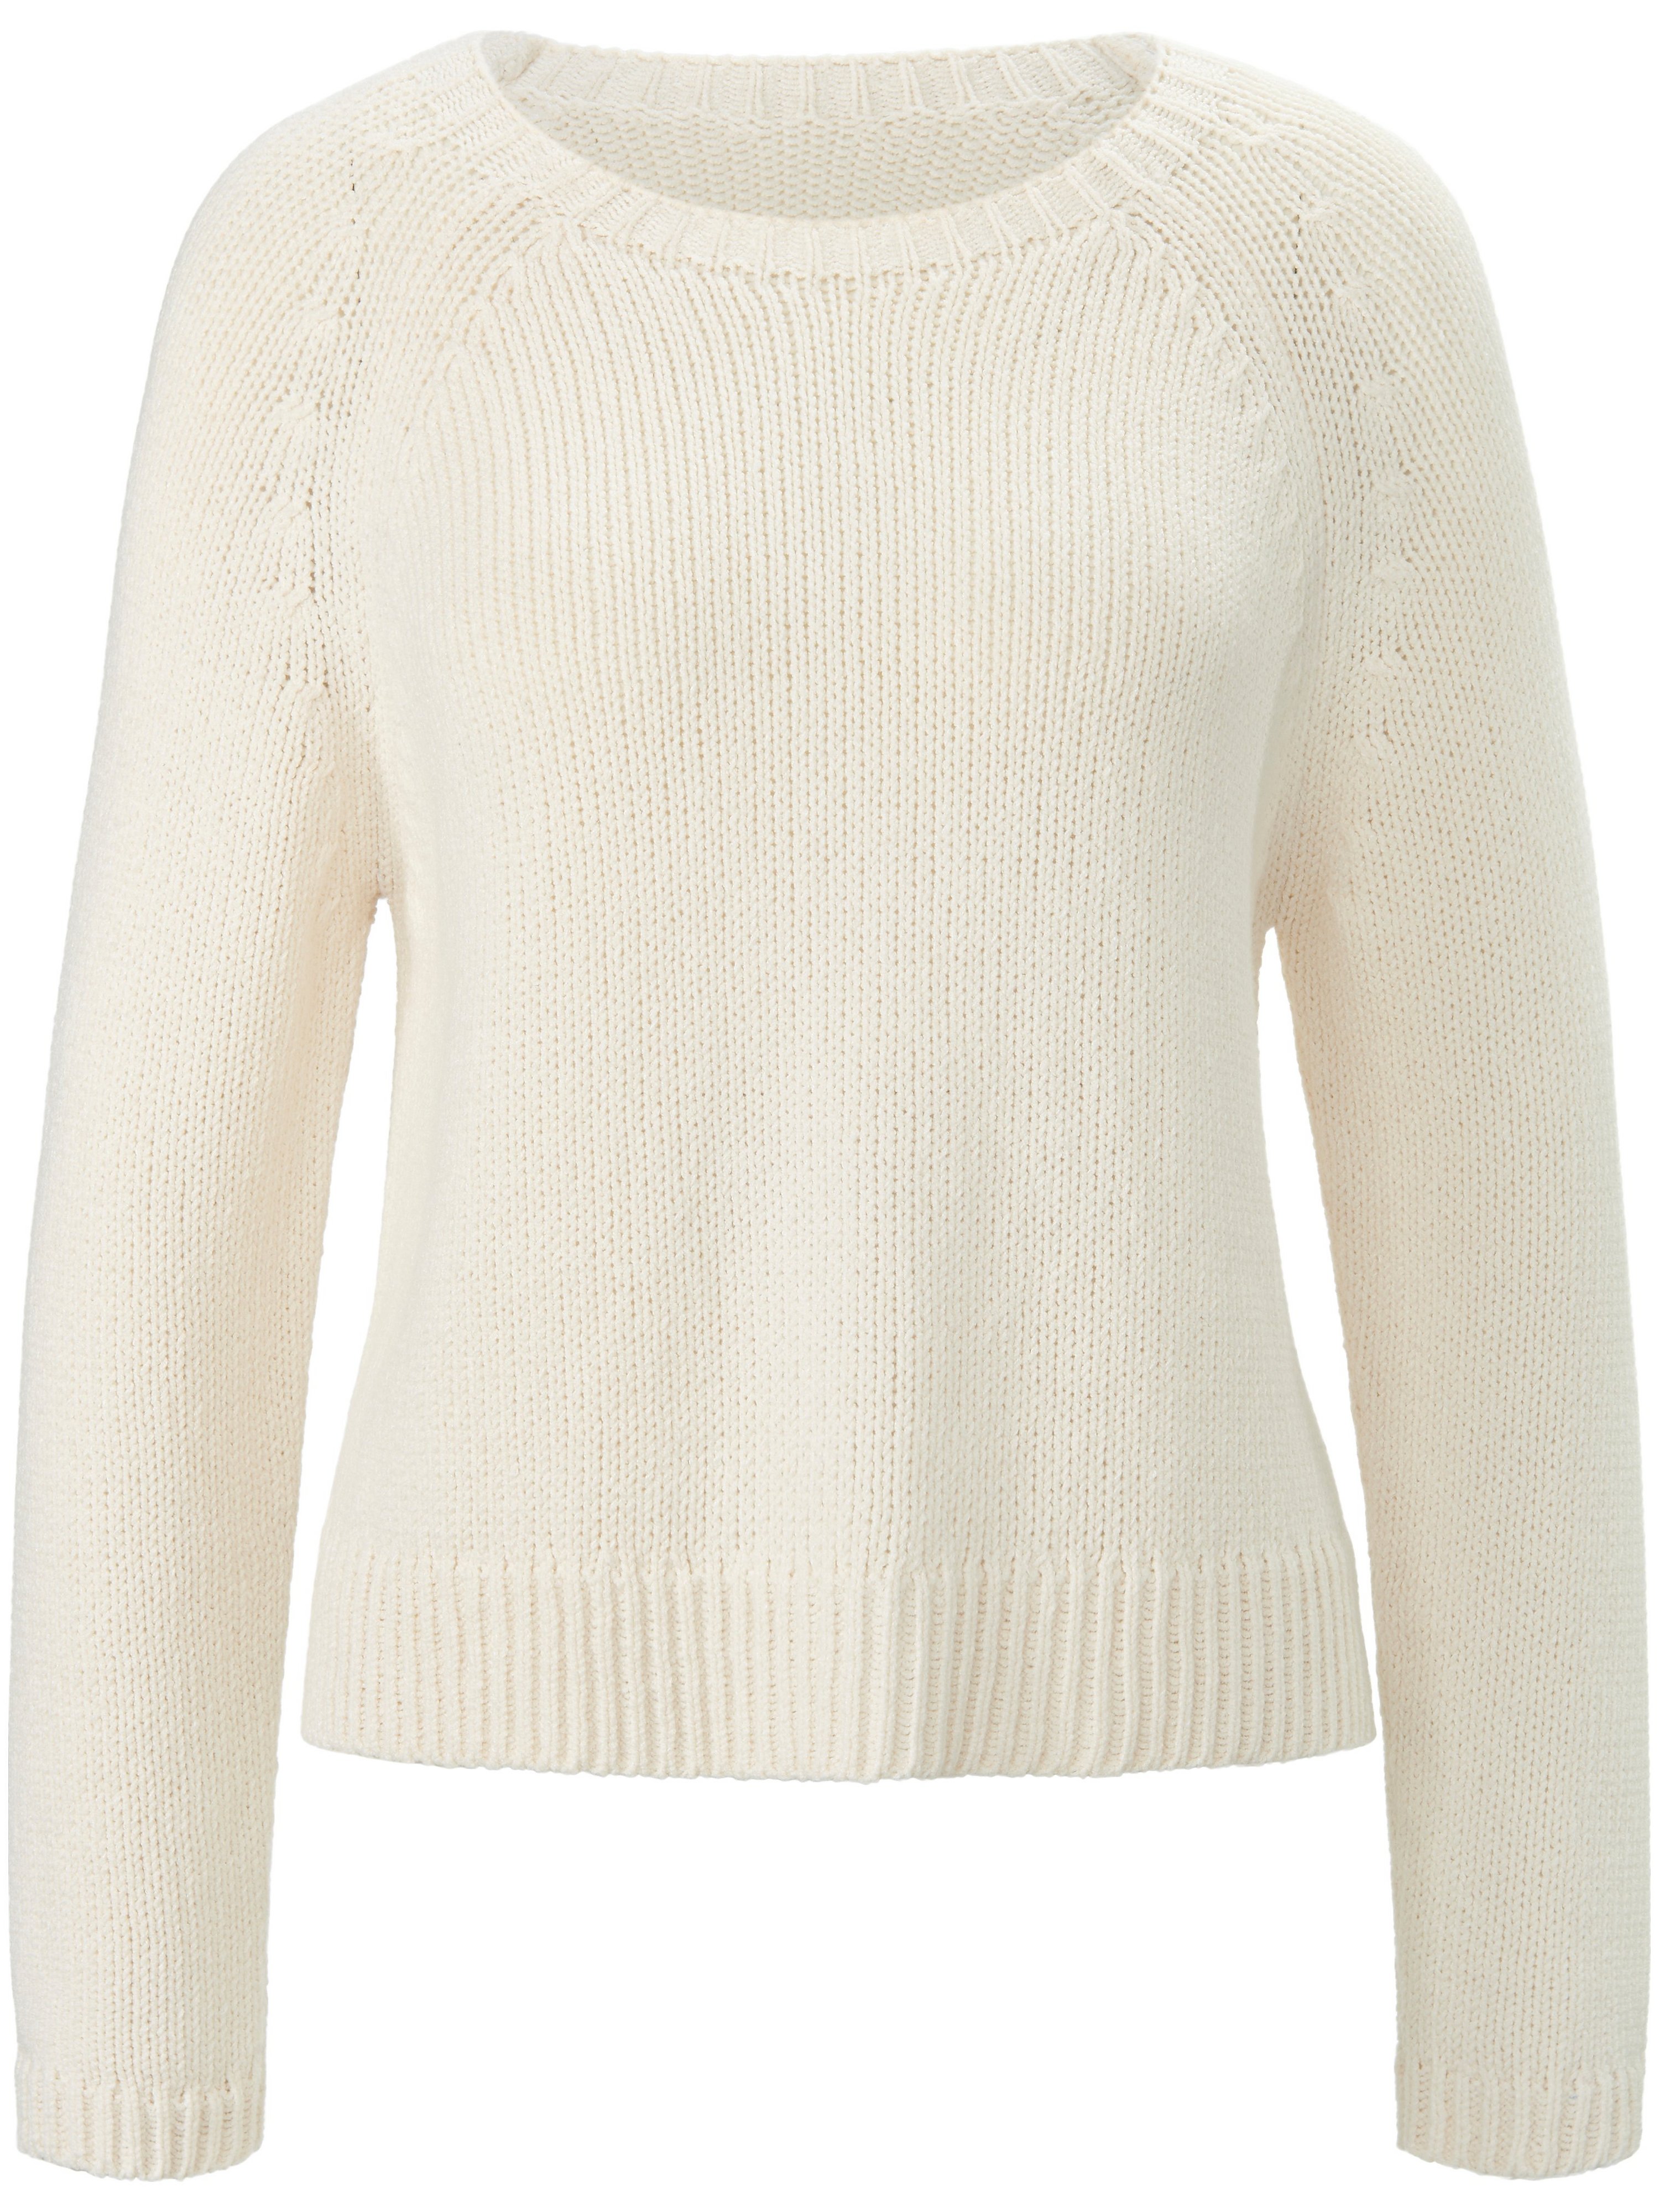 Le pull encolure ronde  tRUE STANDARD blanc taille 40